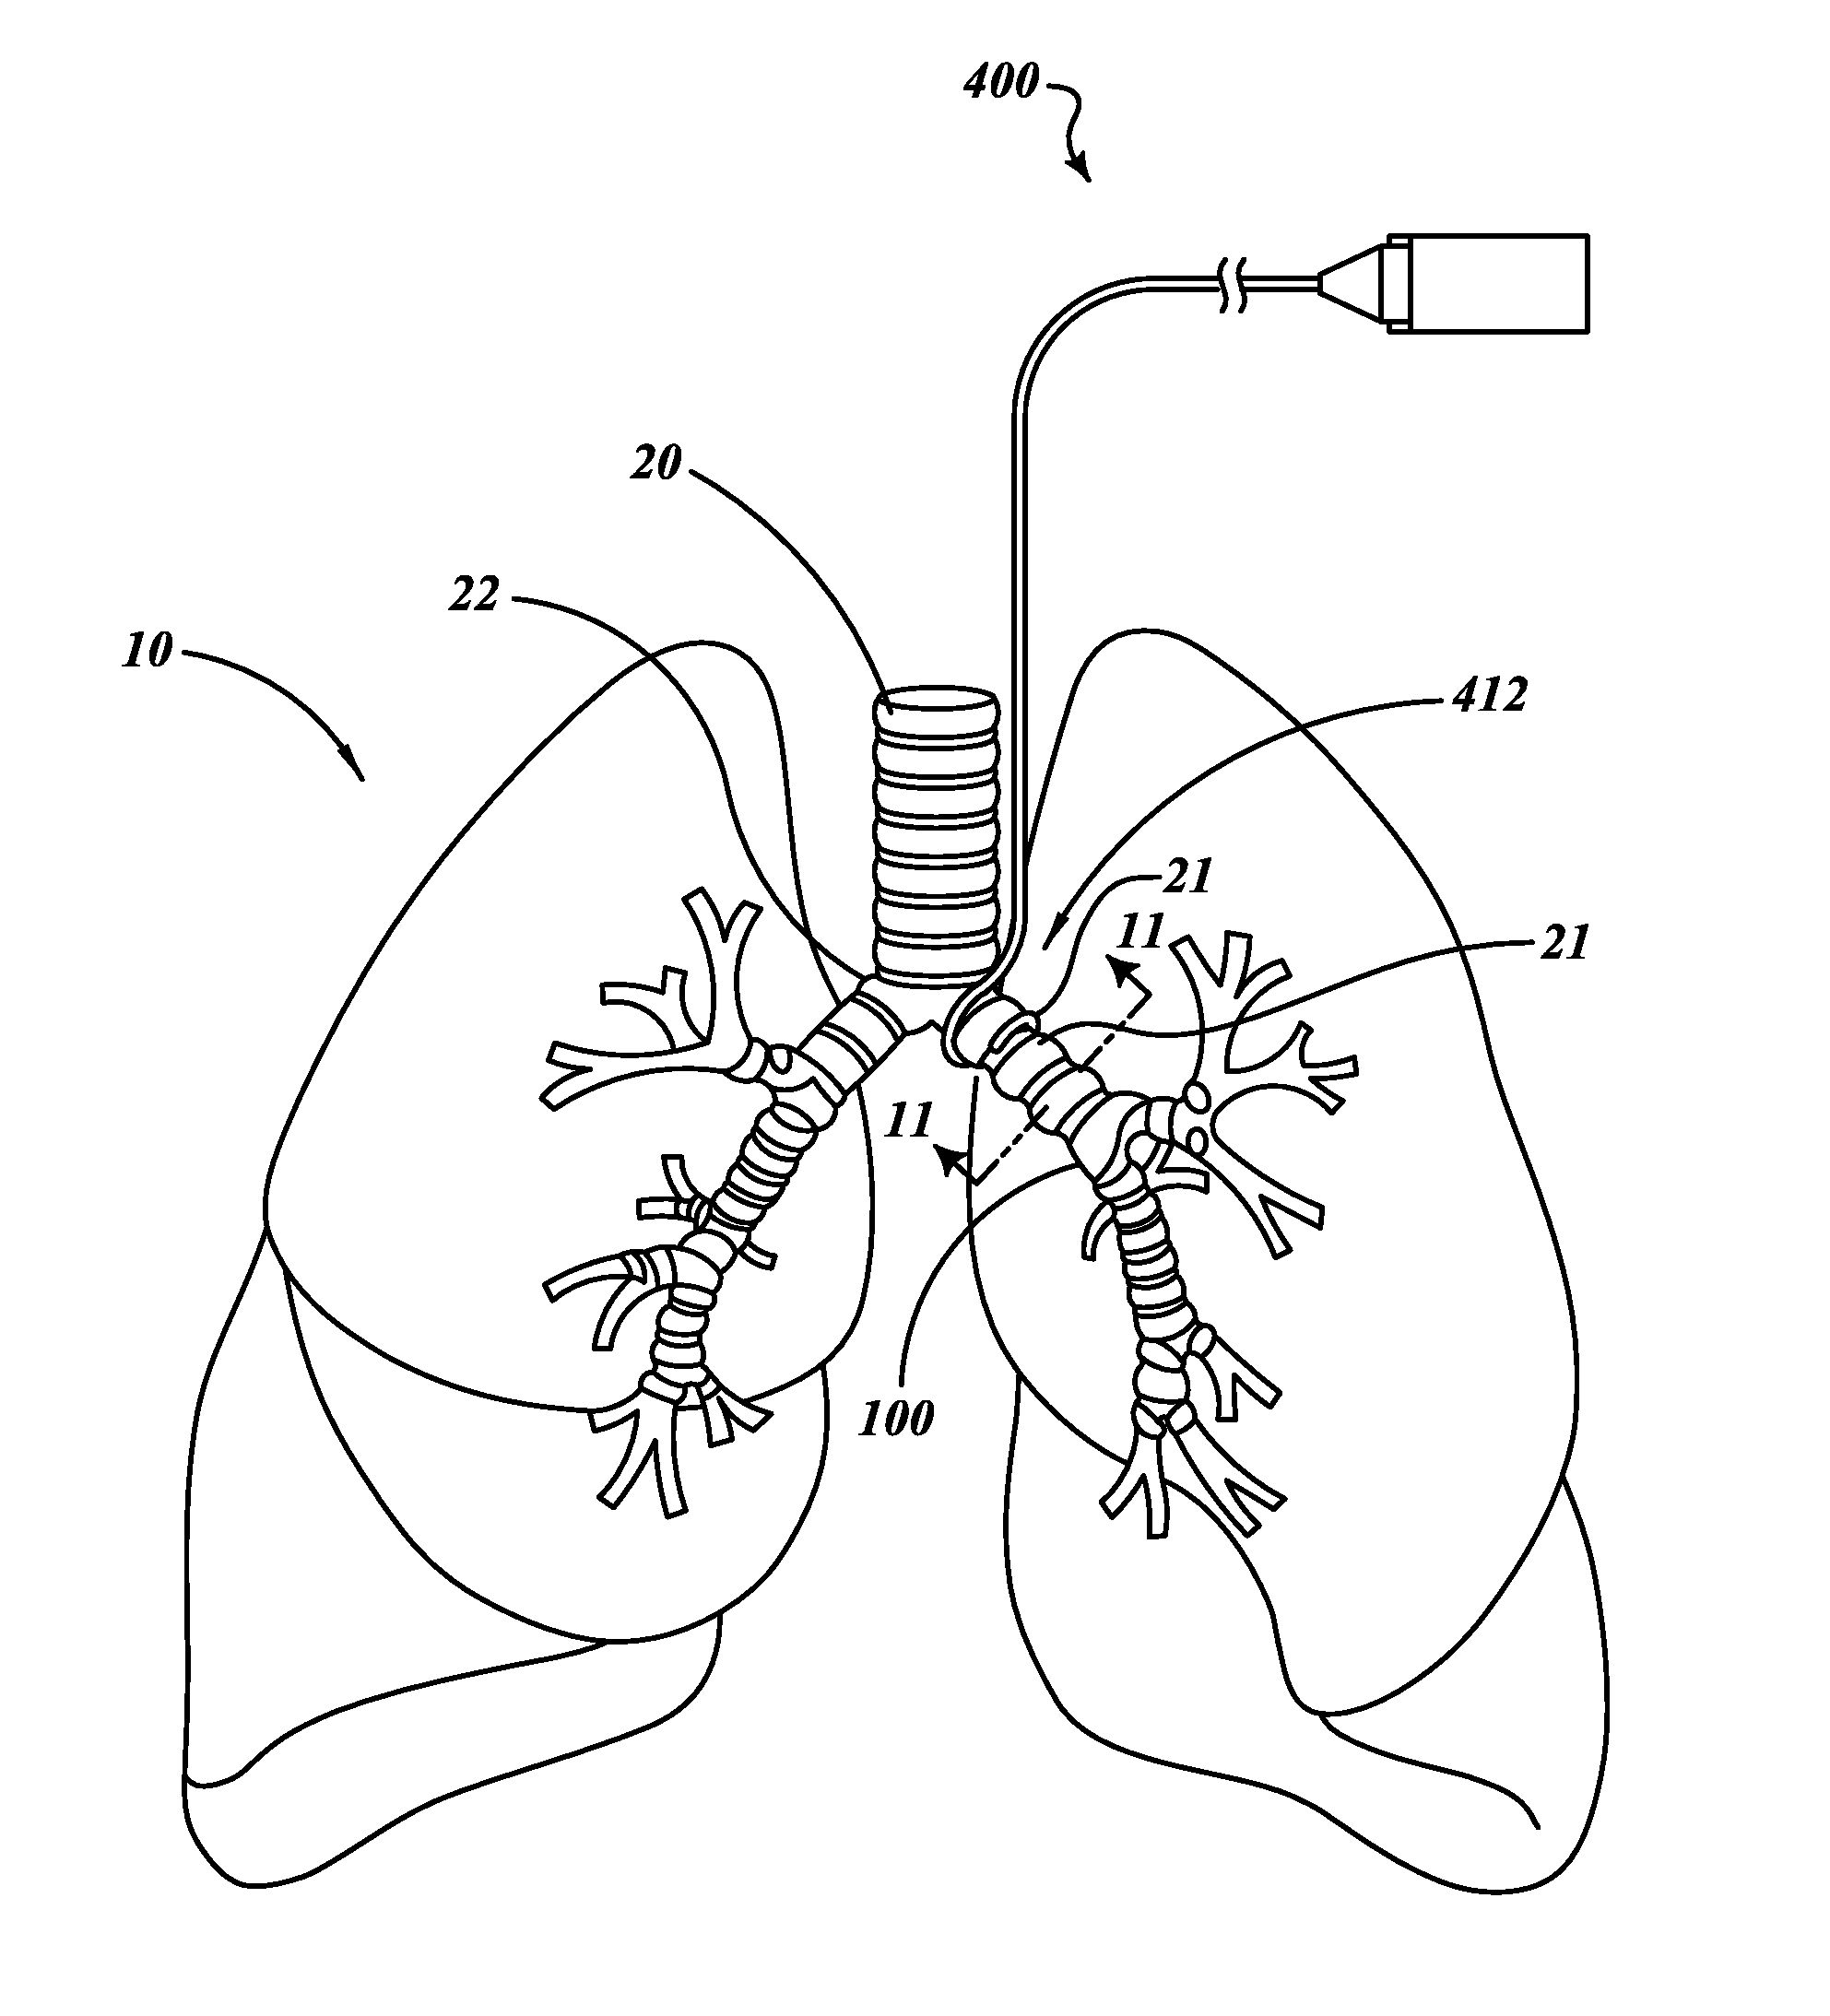 Non-invasive and minimally invasive denervation methods and systems for performing the same